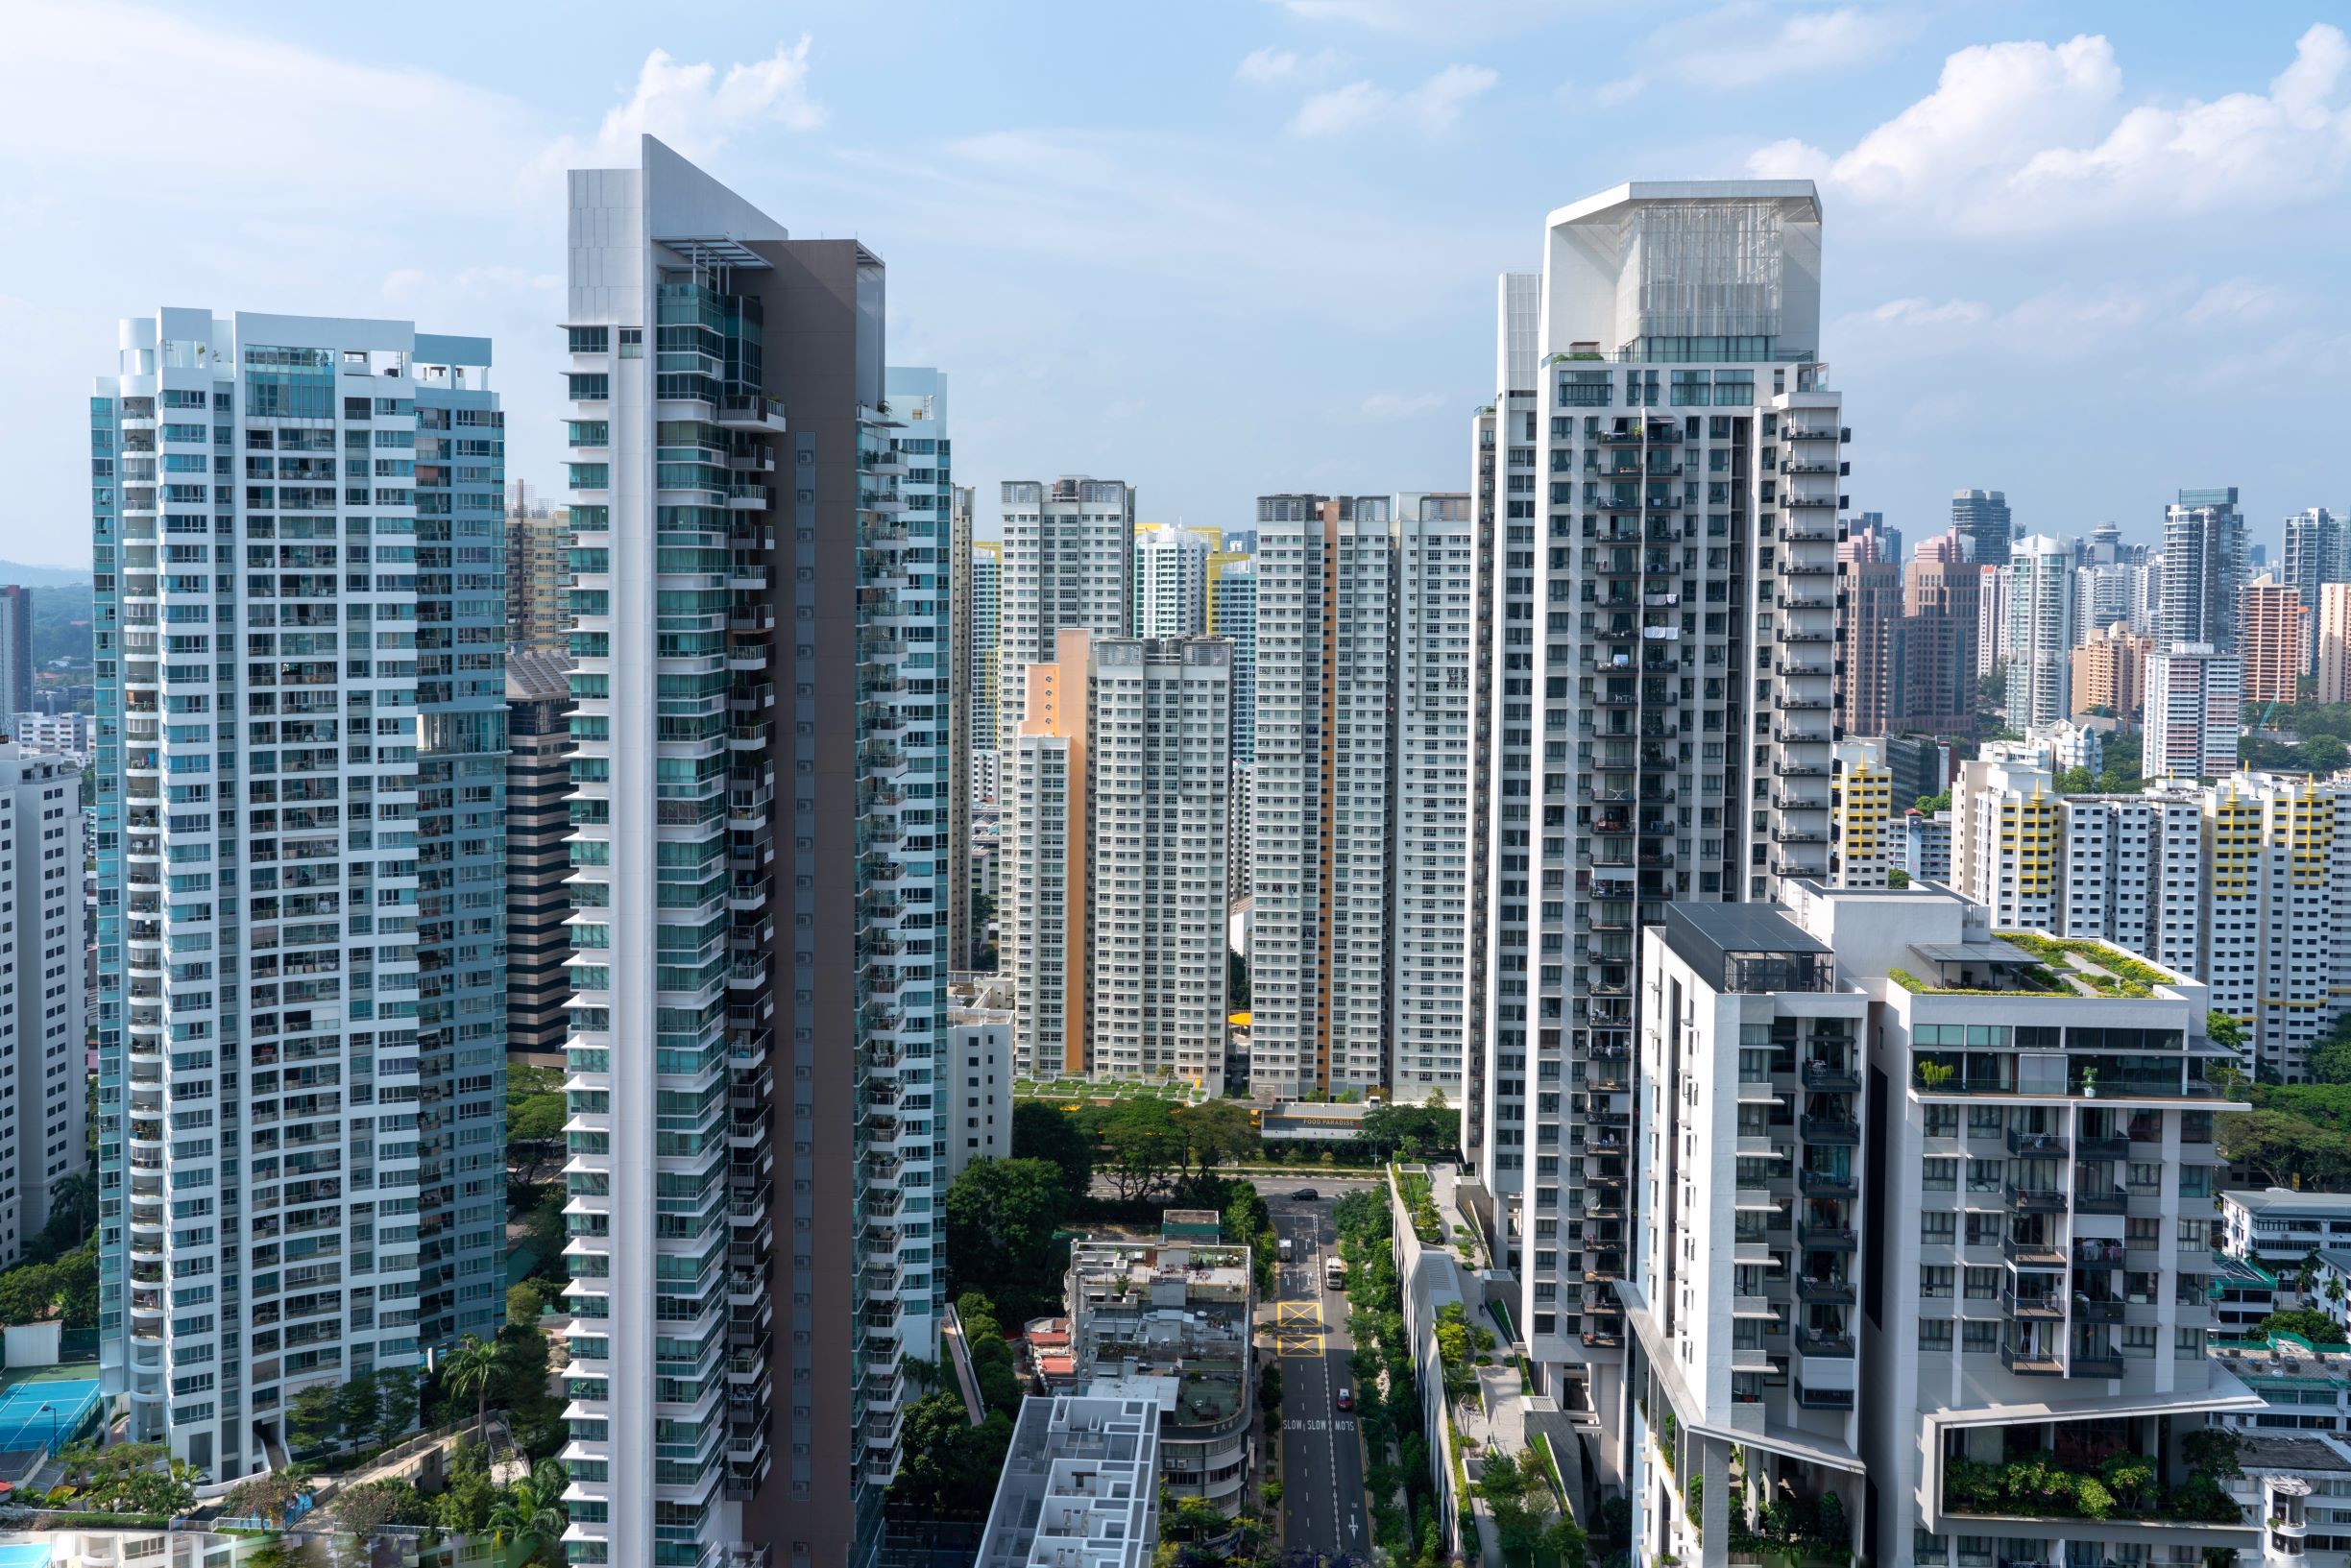 HDB Launches 3,740 flats in February 2021 BTO exercise ...